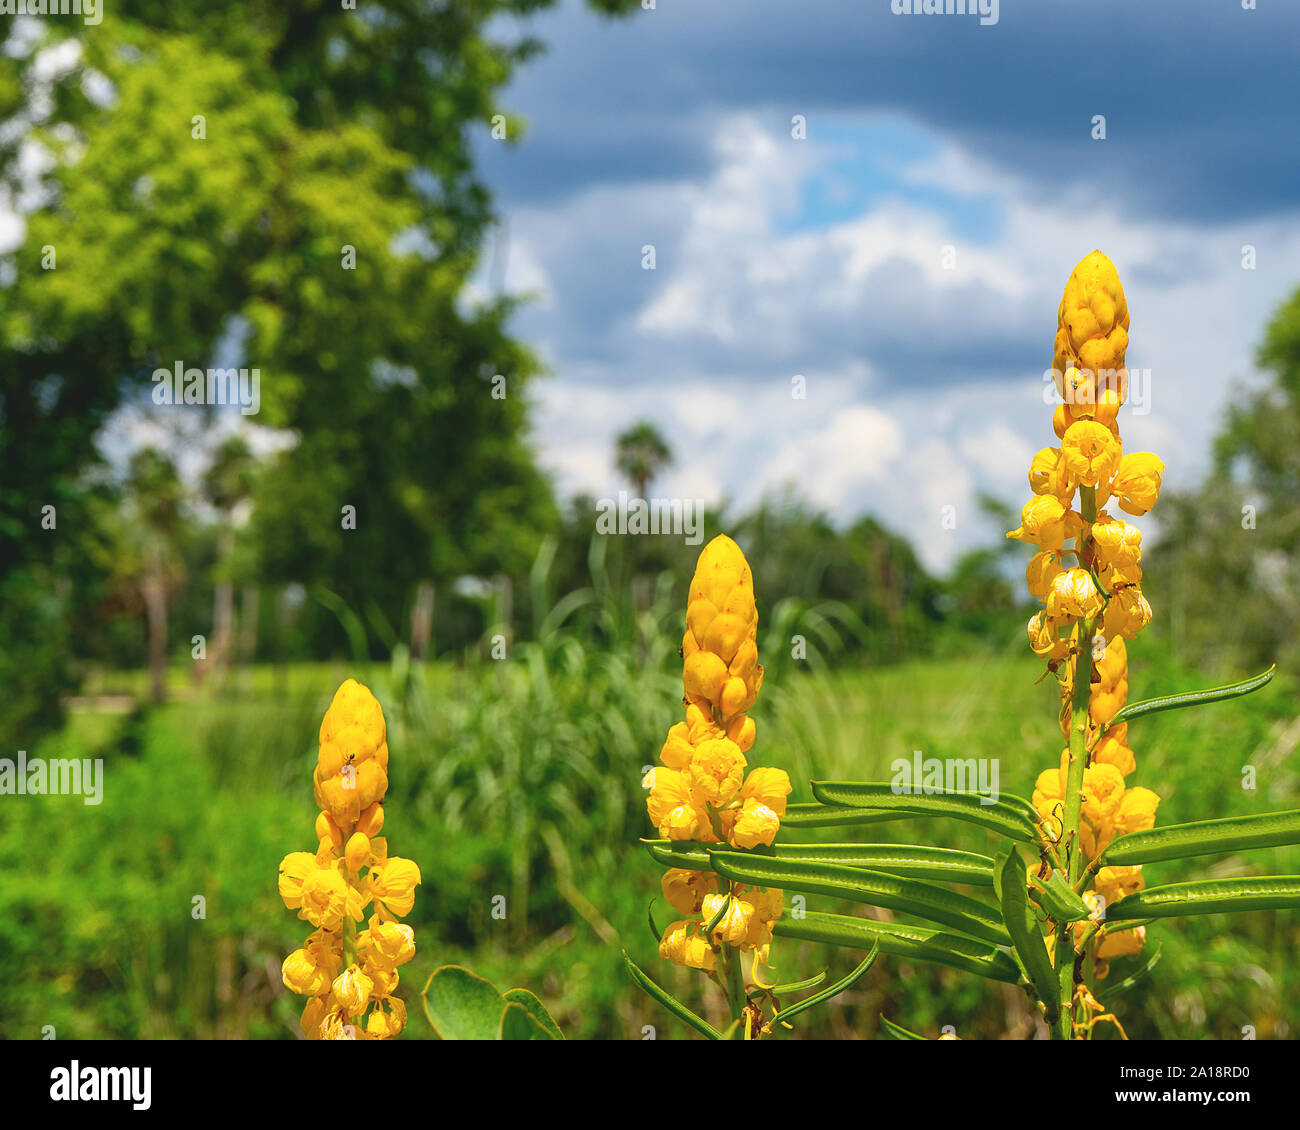 Yellow Candlestick Flowers With A Blurred Background And A Blue Sky Stock Photo